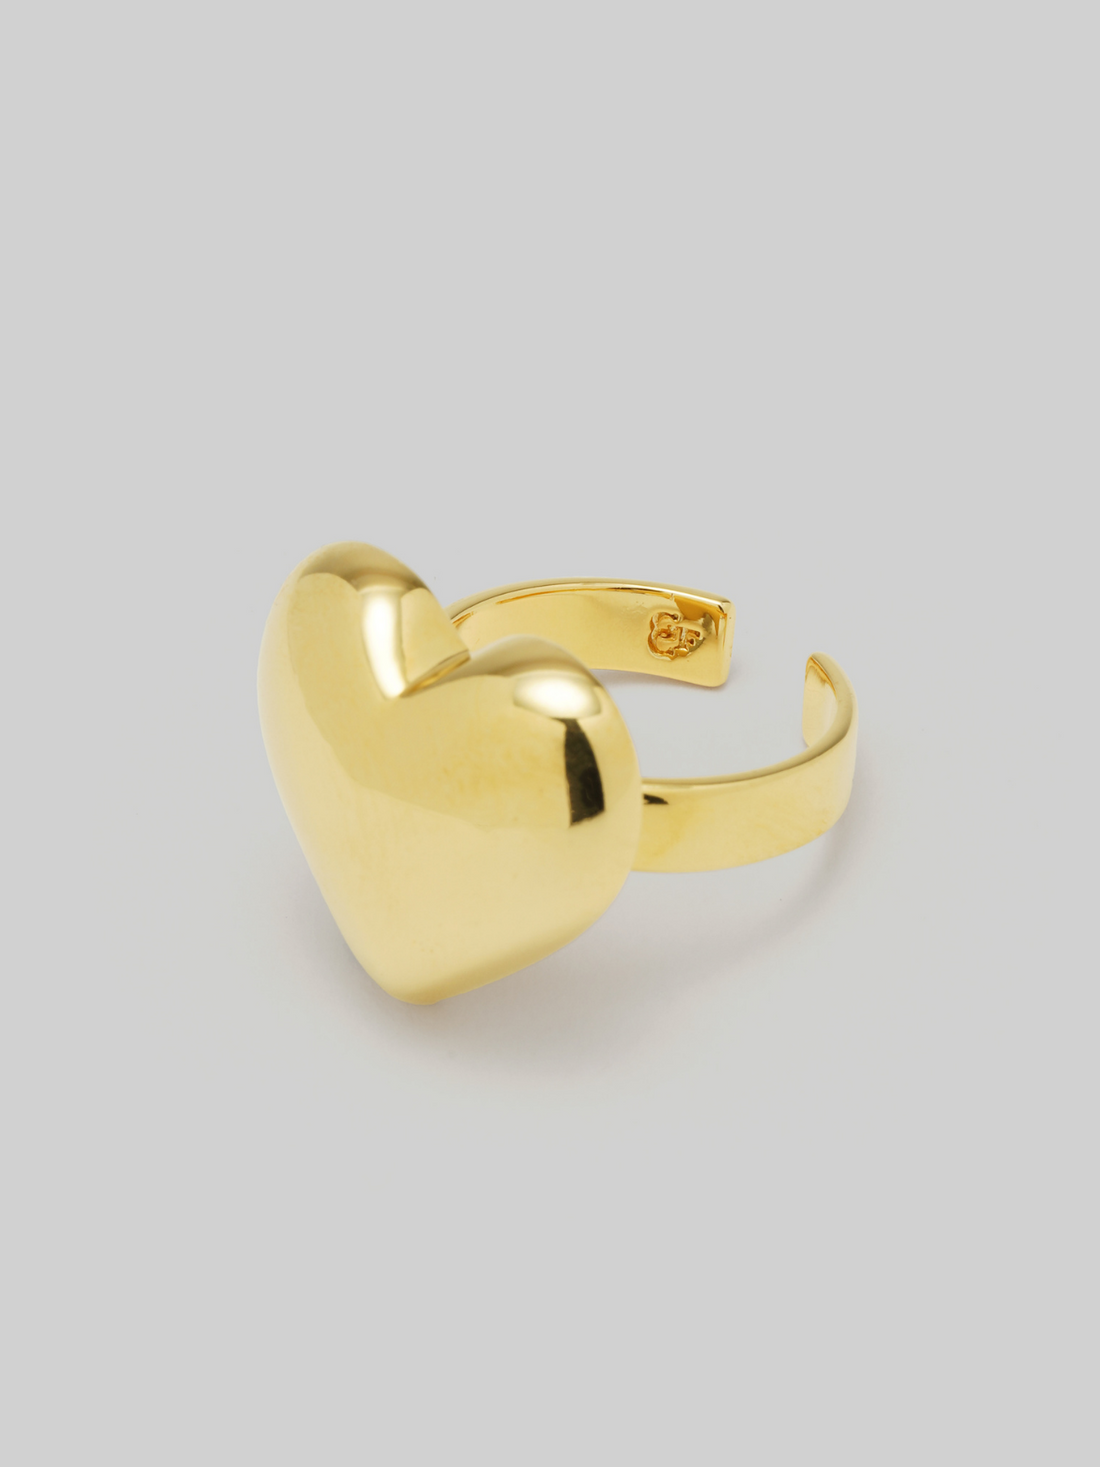 Swell heart ring